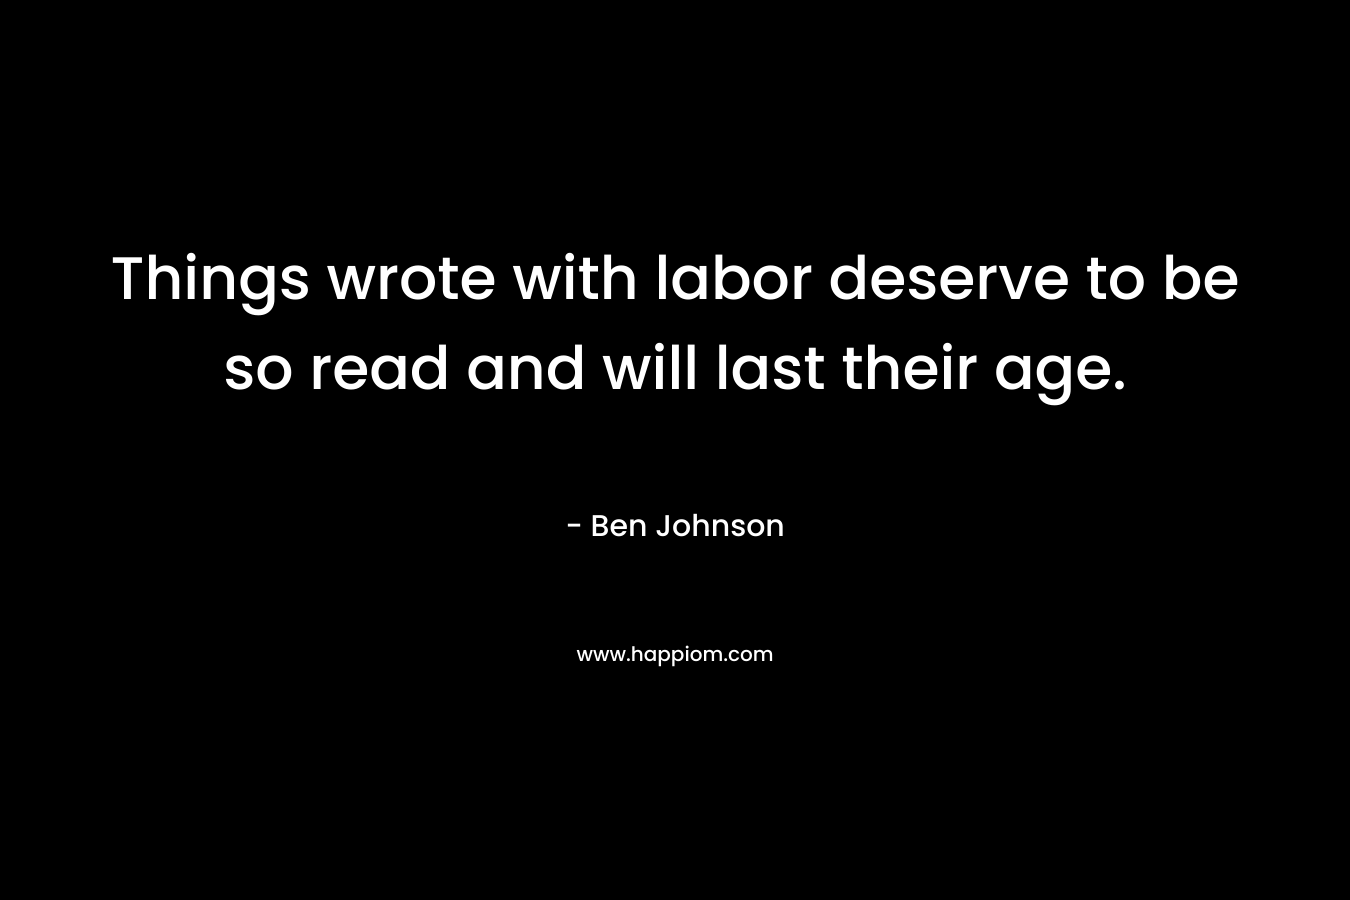 Things wrote with labor deserve to be so read and will last their age. – Ben Johnson